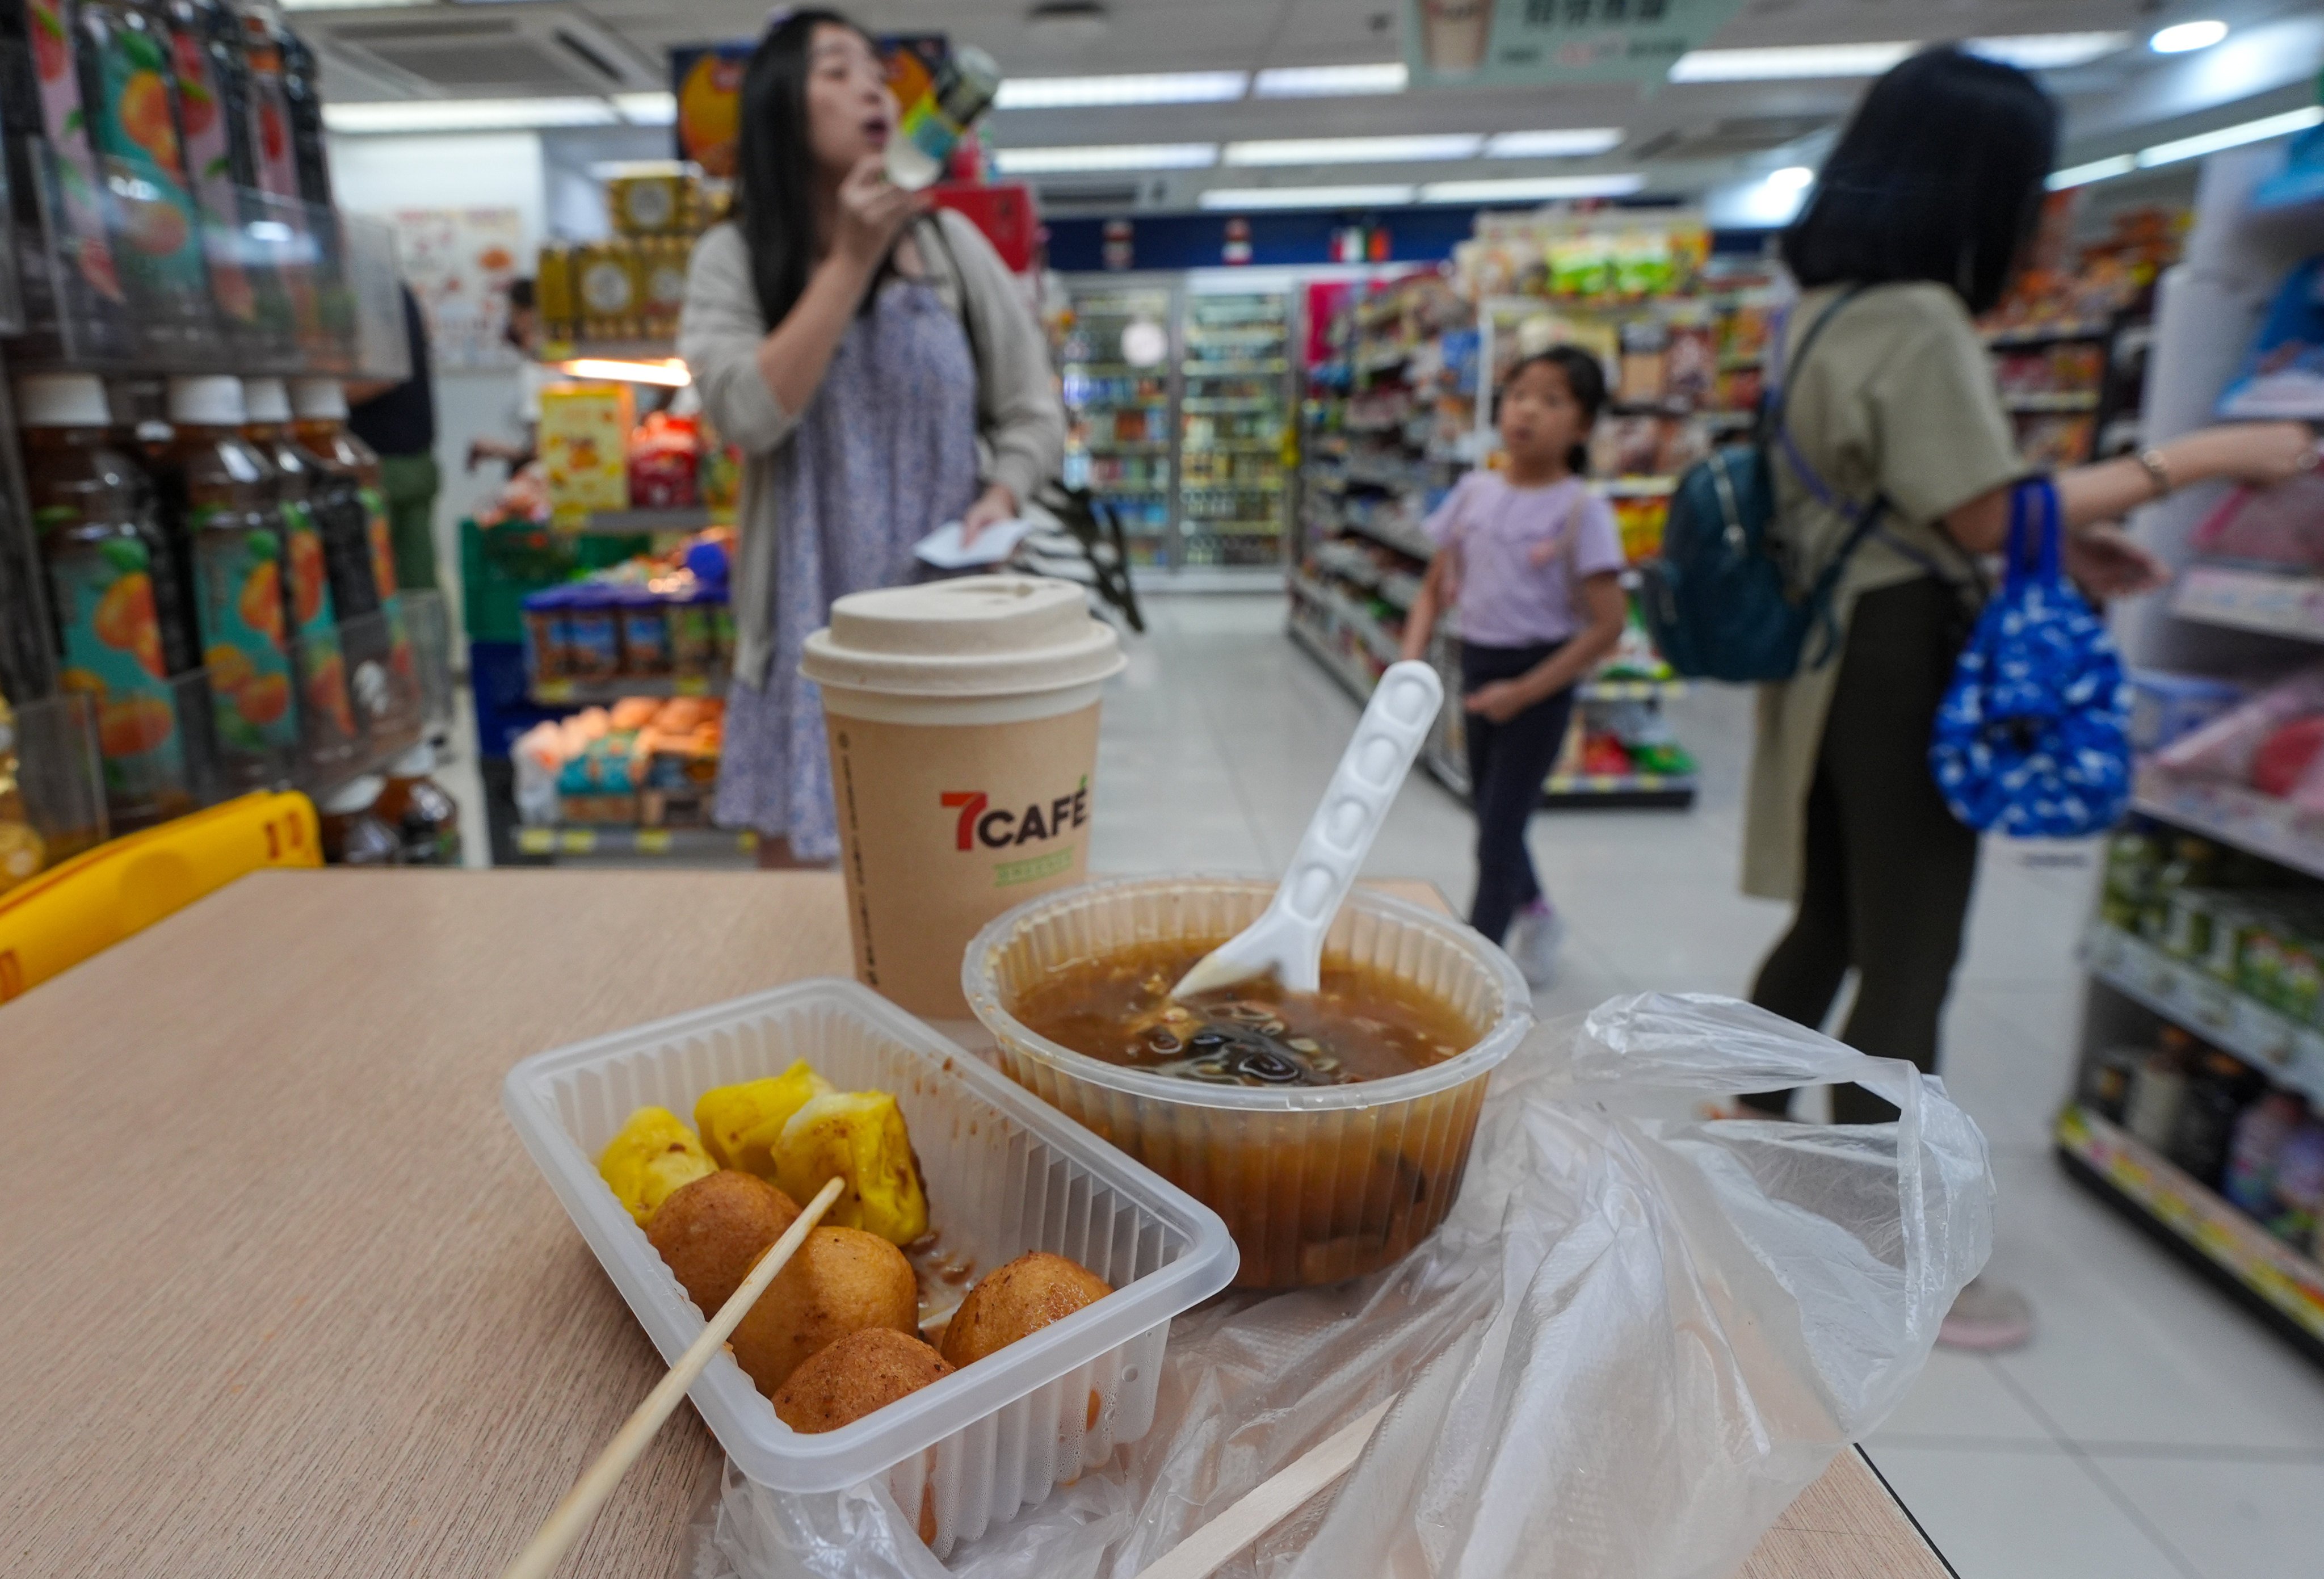 Throwaway plastic boxes are provided at 7-Eleven snack bars as confusion reigns over whether eating in stores counts as ‘dining in’ Photo: Eugene Lee